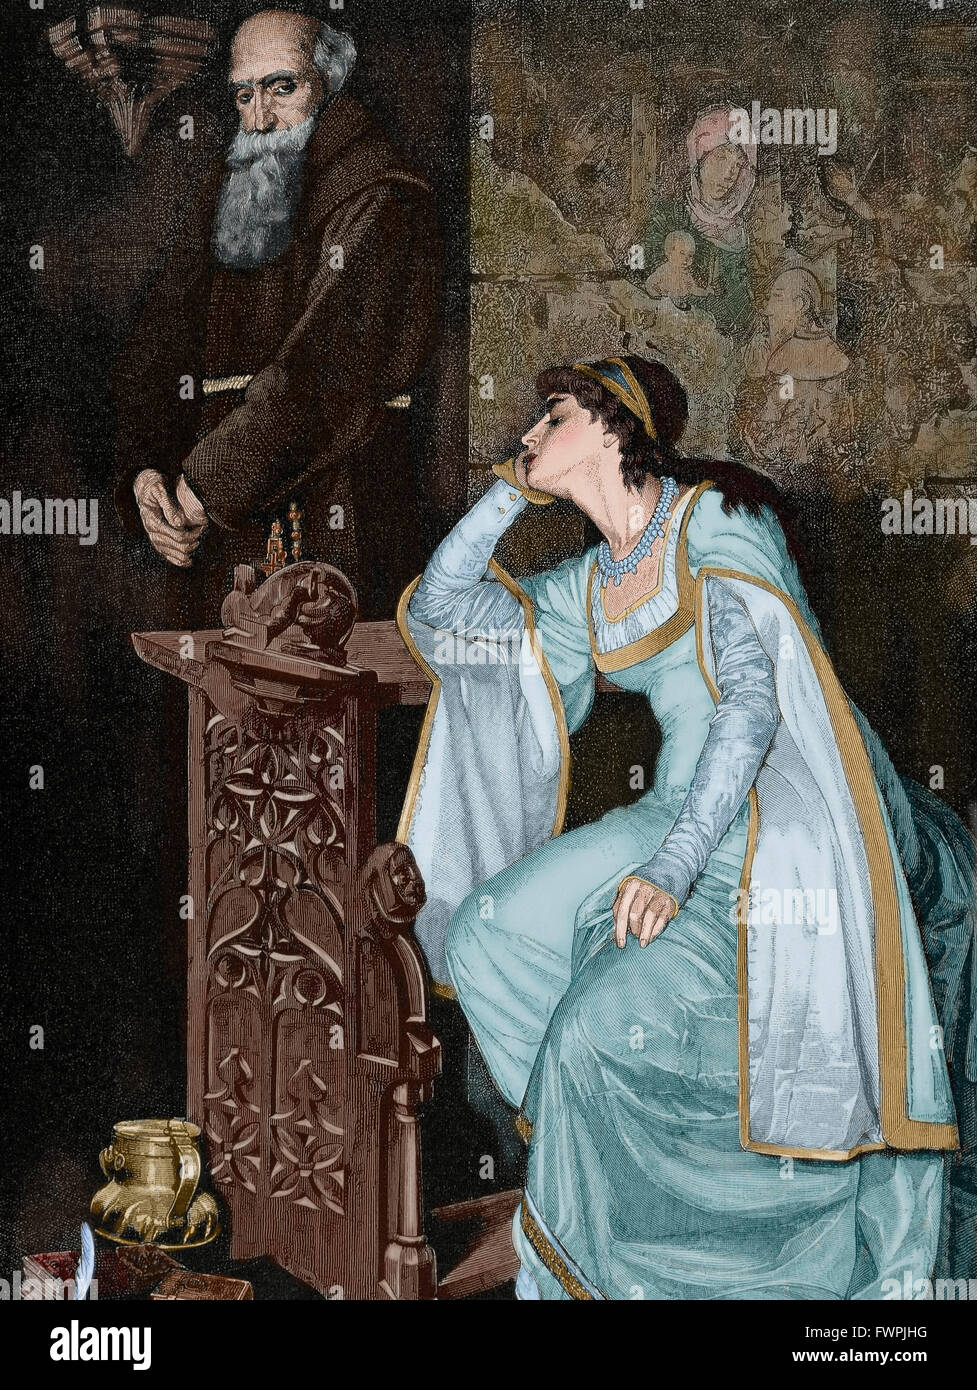 William Shakespeare (1564-1616). English writer. Romeo and Juliet. Juliet with Friar Laurence. Engraving by E. Hopmann, 1884. Colored. Stock Photo